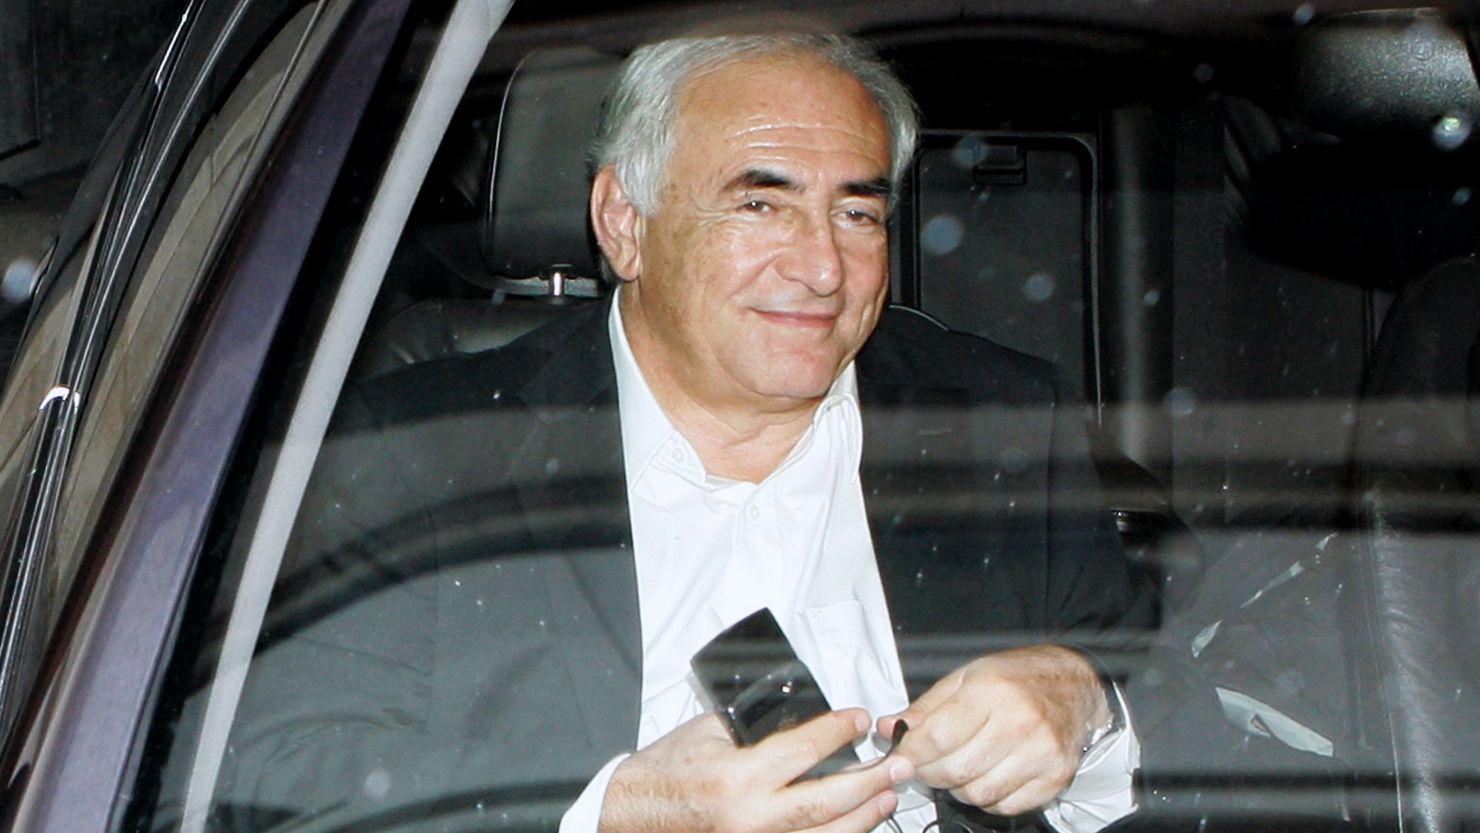 Dominique Strauss-Kahn travels to his lawyer's offices to be questioned by police on September 12, in Paris, France.